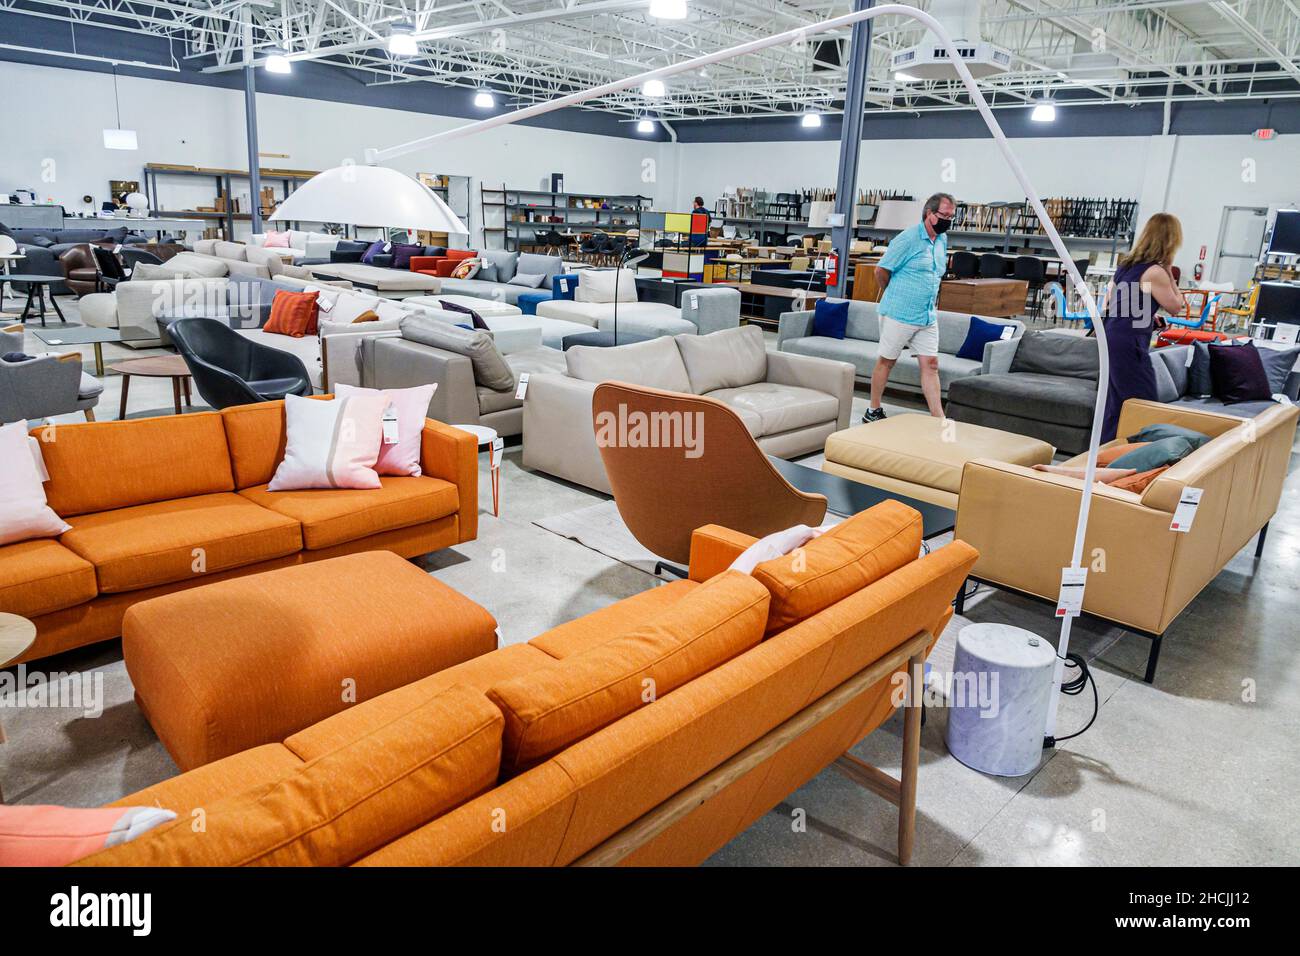 The Best Time to Buy Furniture in 2023